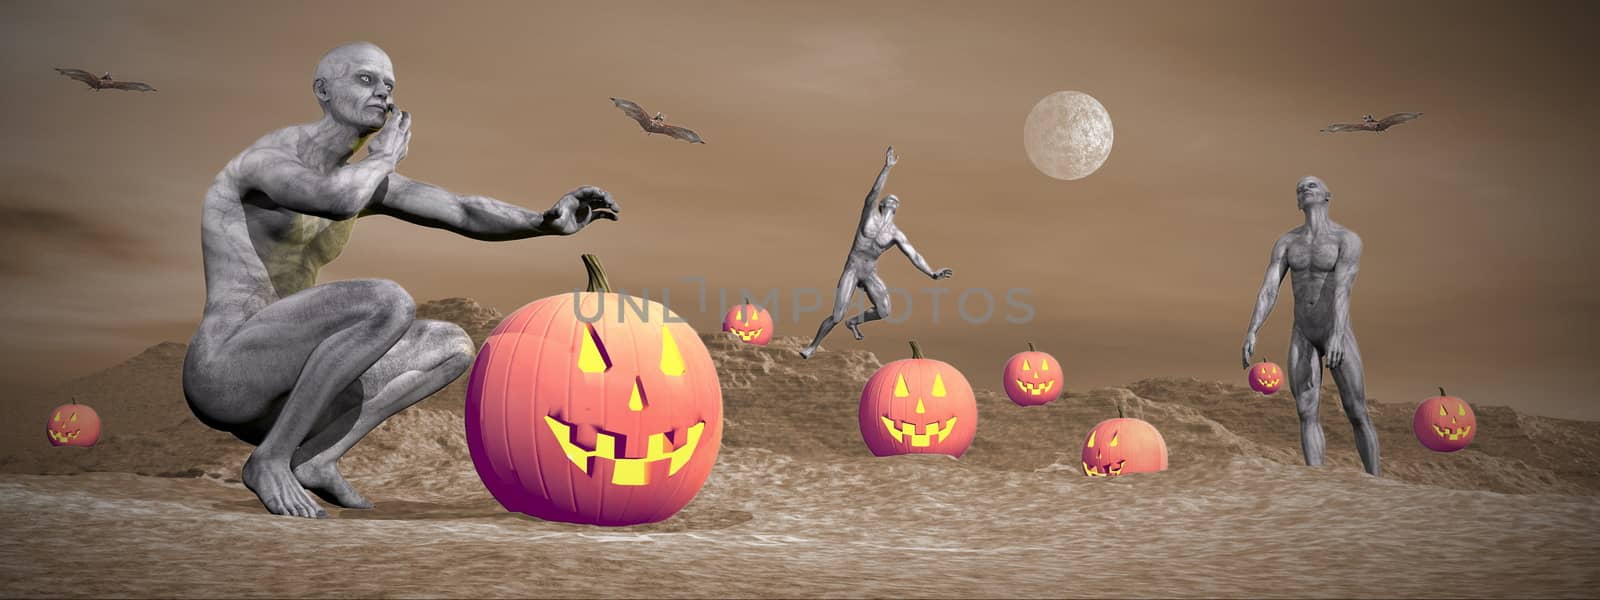 Several zombies and flying bats next to pumkins for Halloween, sepia background and colorful objects - 3D render